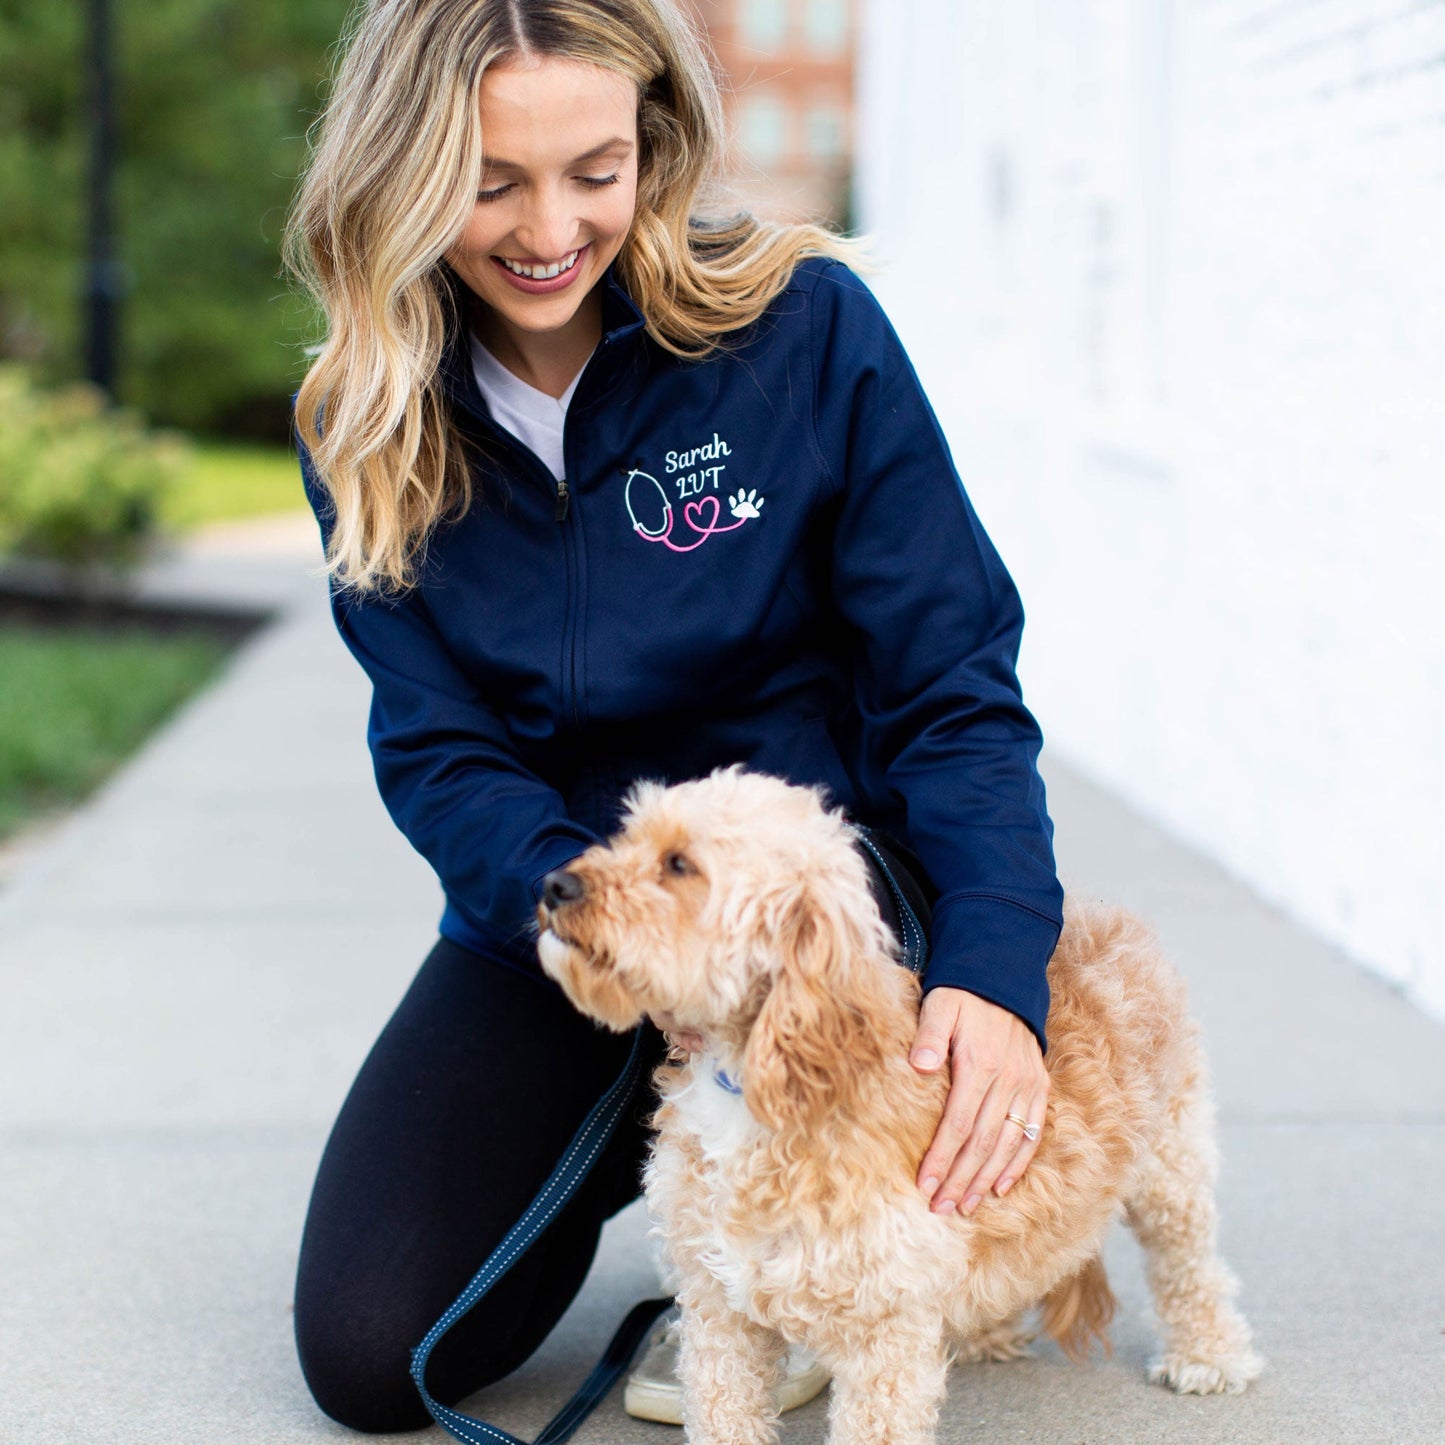 Girl wearing a blue jacket with personalized vet technician name embroidery and paw print stethoscope kneeling next to her small dog